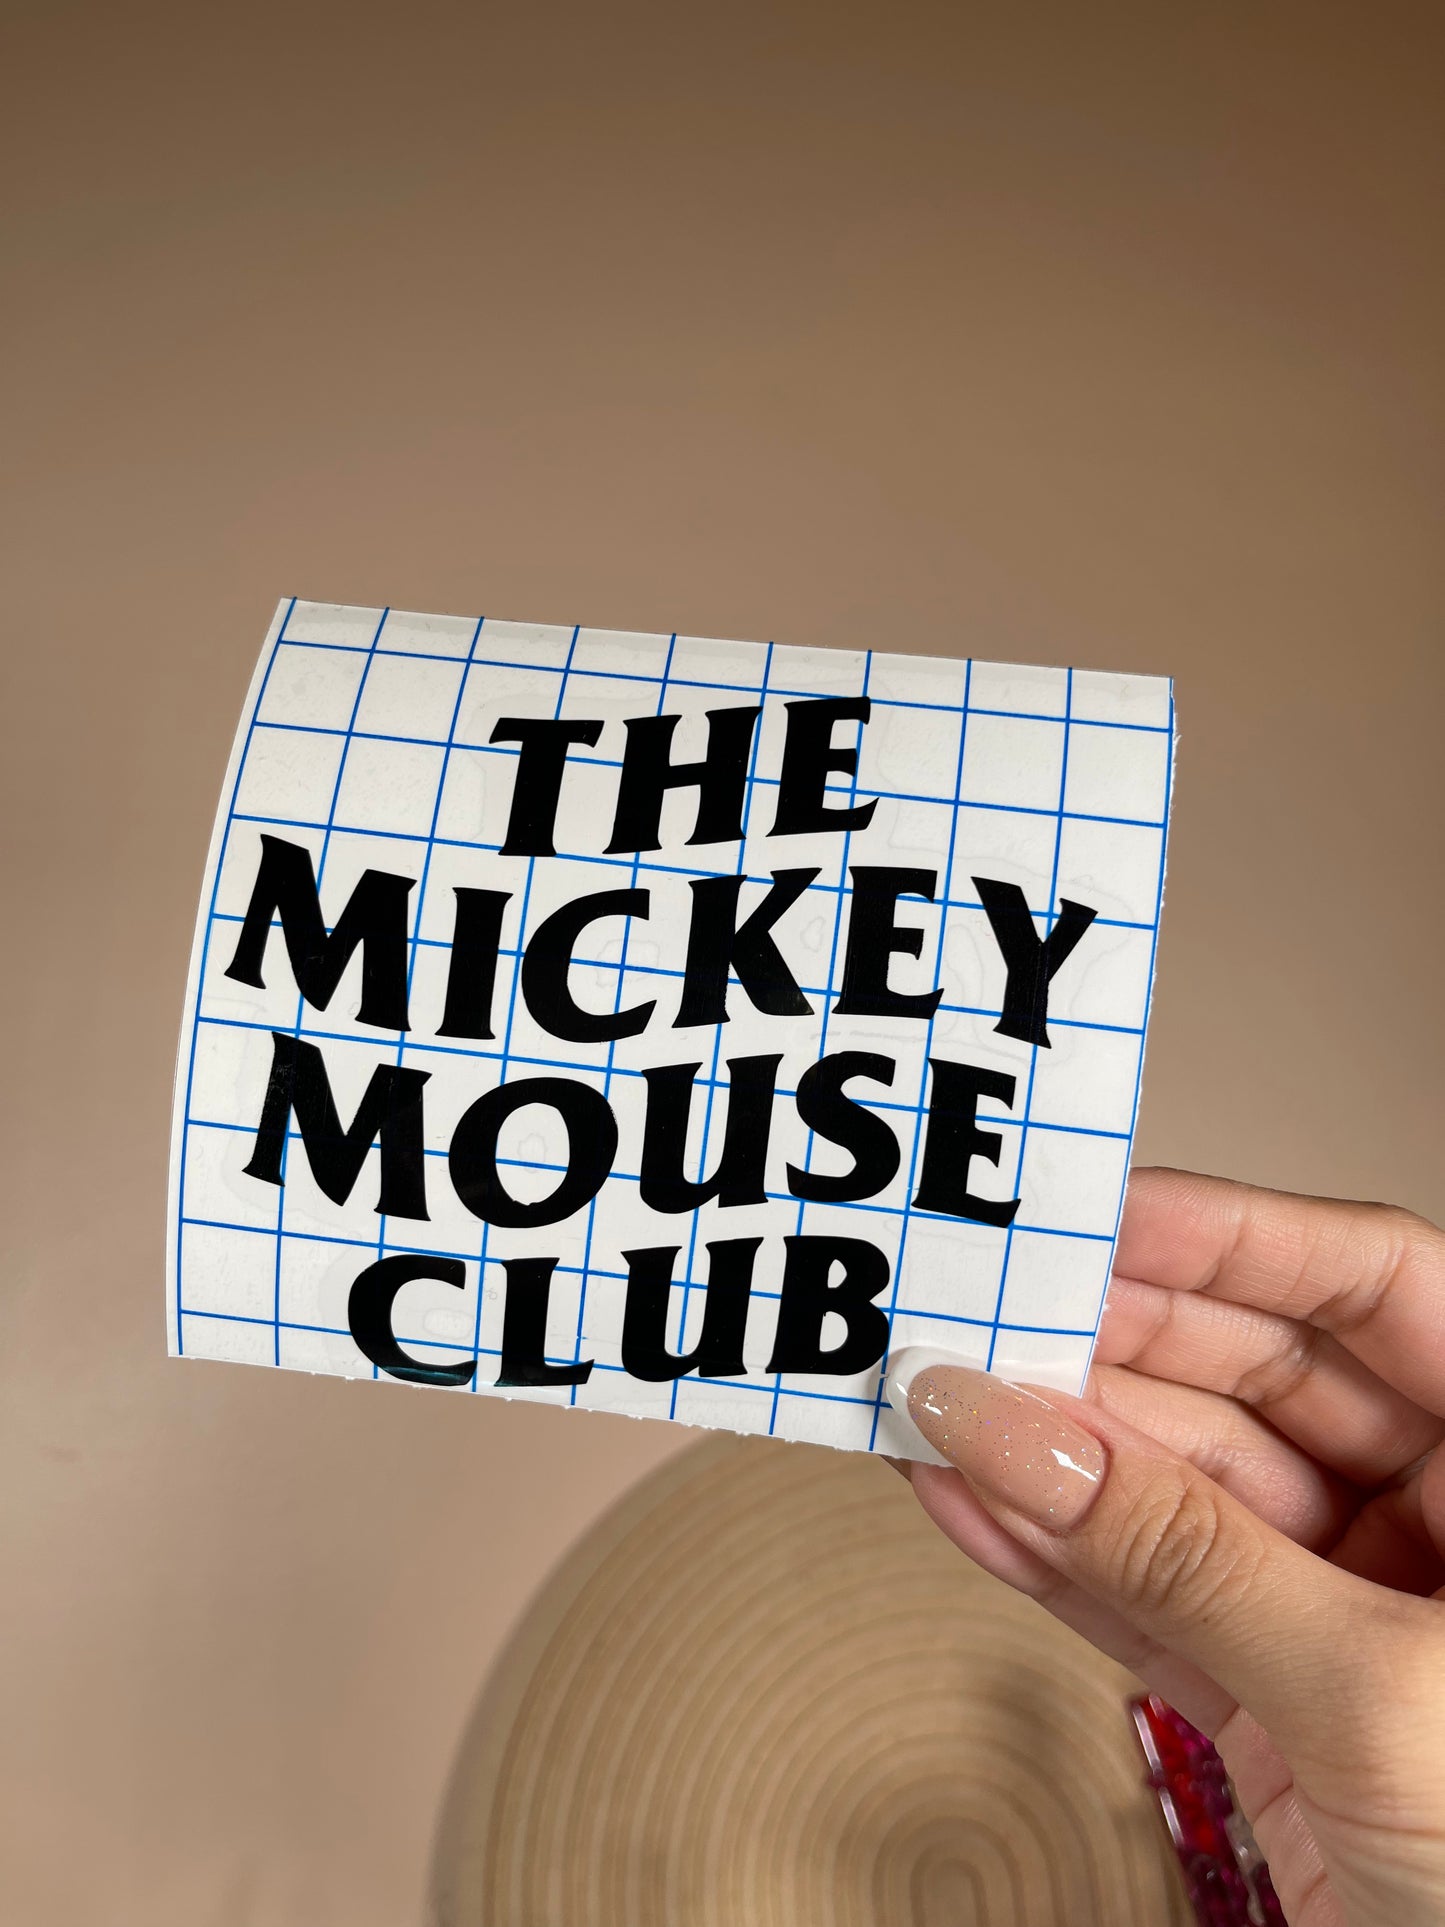 The Mickey Mouse club decal